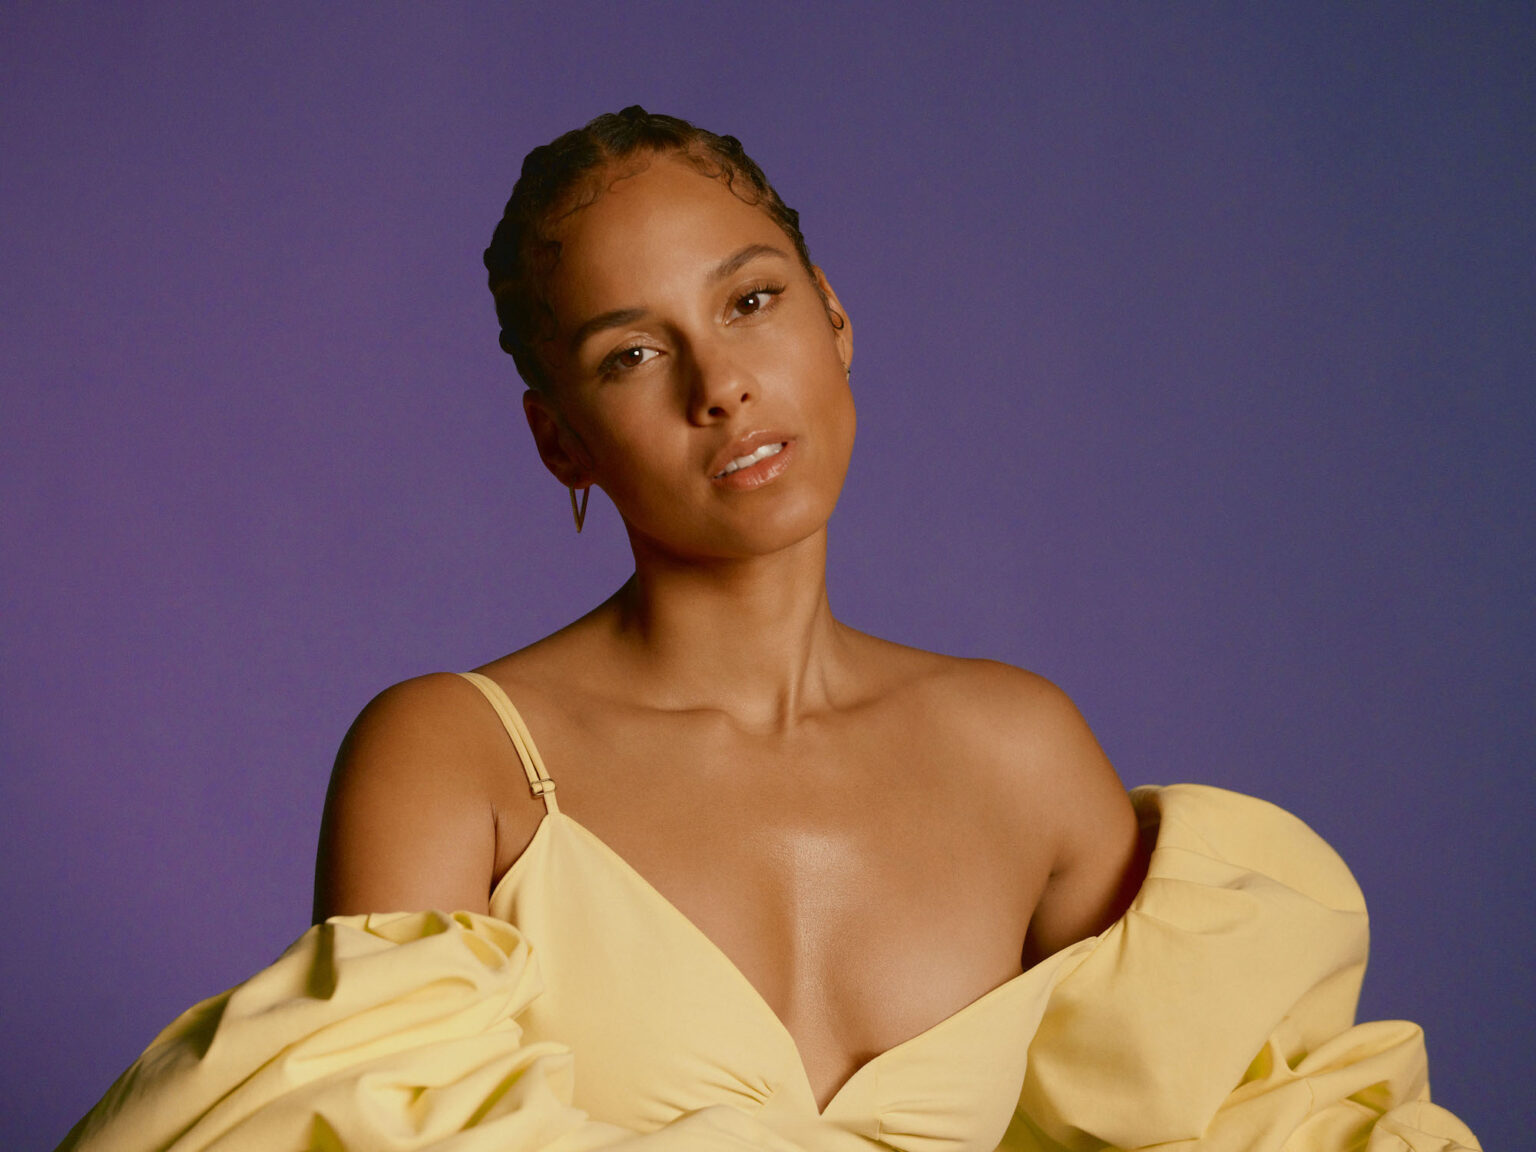 Alicia Keys Announces 2022 Dates for 'ALICIA + Keys World Tour' Rated R&B